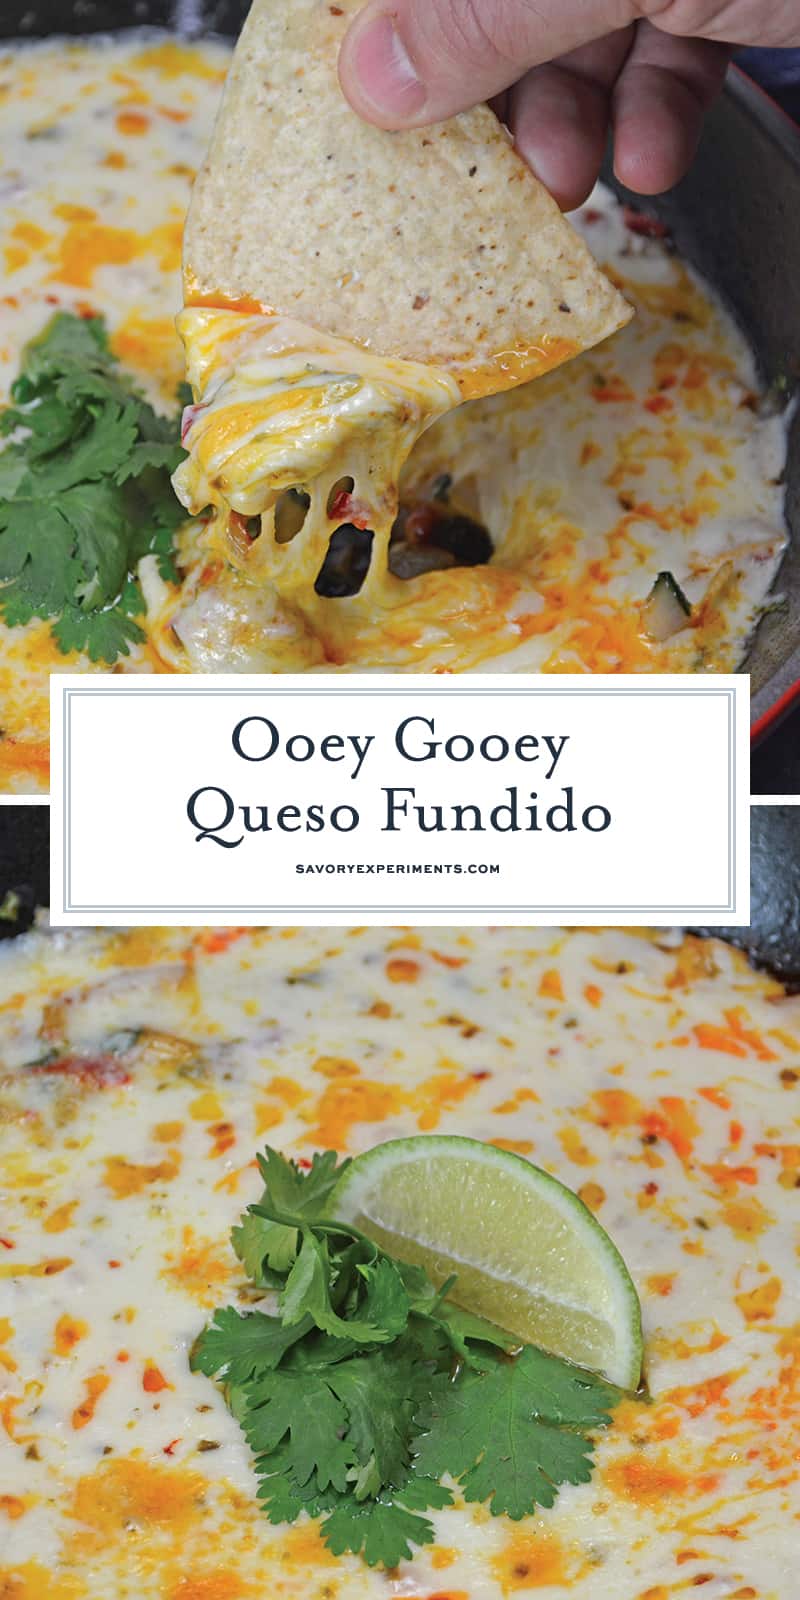 This Queso Fundido recipe is an easy Mexican cheese dip made of chopped vegetables, cilantro, chile powder and shredded cheddar and pepper jack cheese! #quesofundido #mexicancheesedip www.savoryexperiments.com